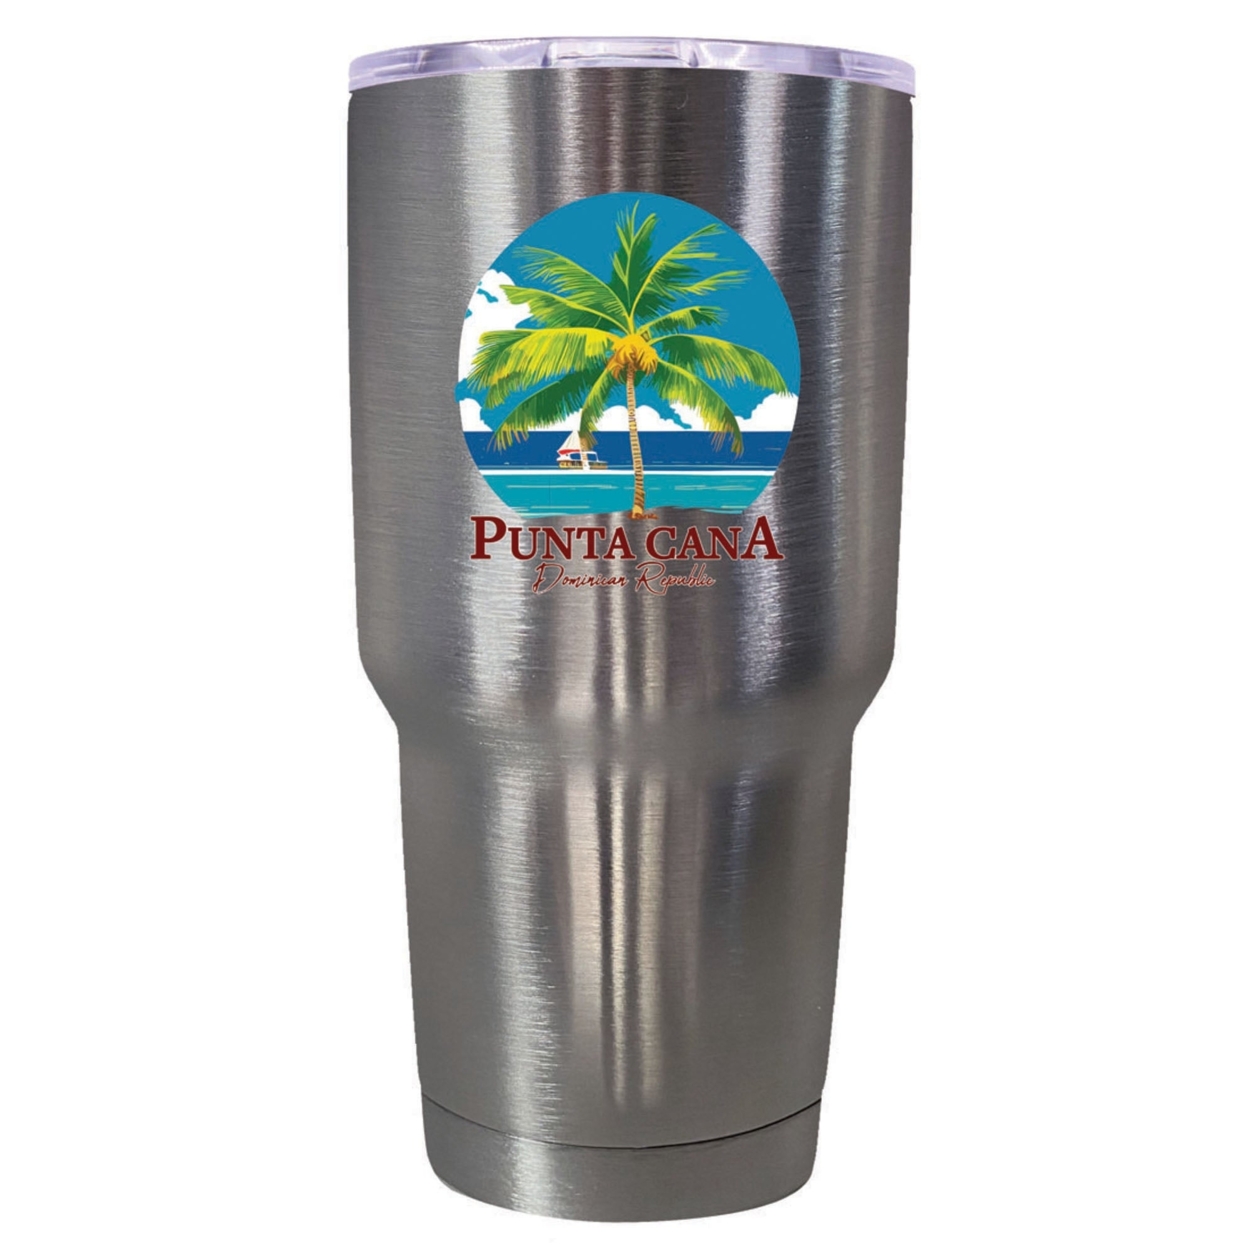 Punta Cana Dominican Republic Souvenir 24 Oz Insulated Stainless Steel Tumbler - White, PARROT B